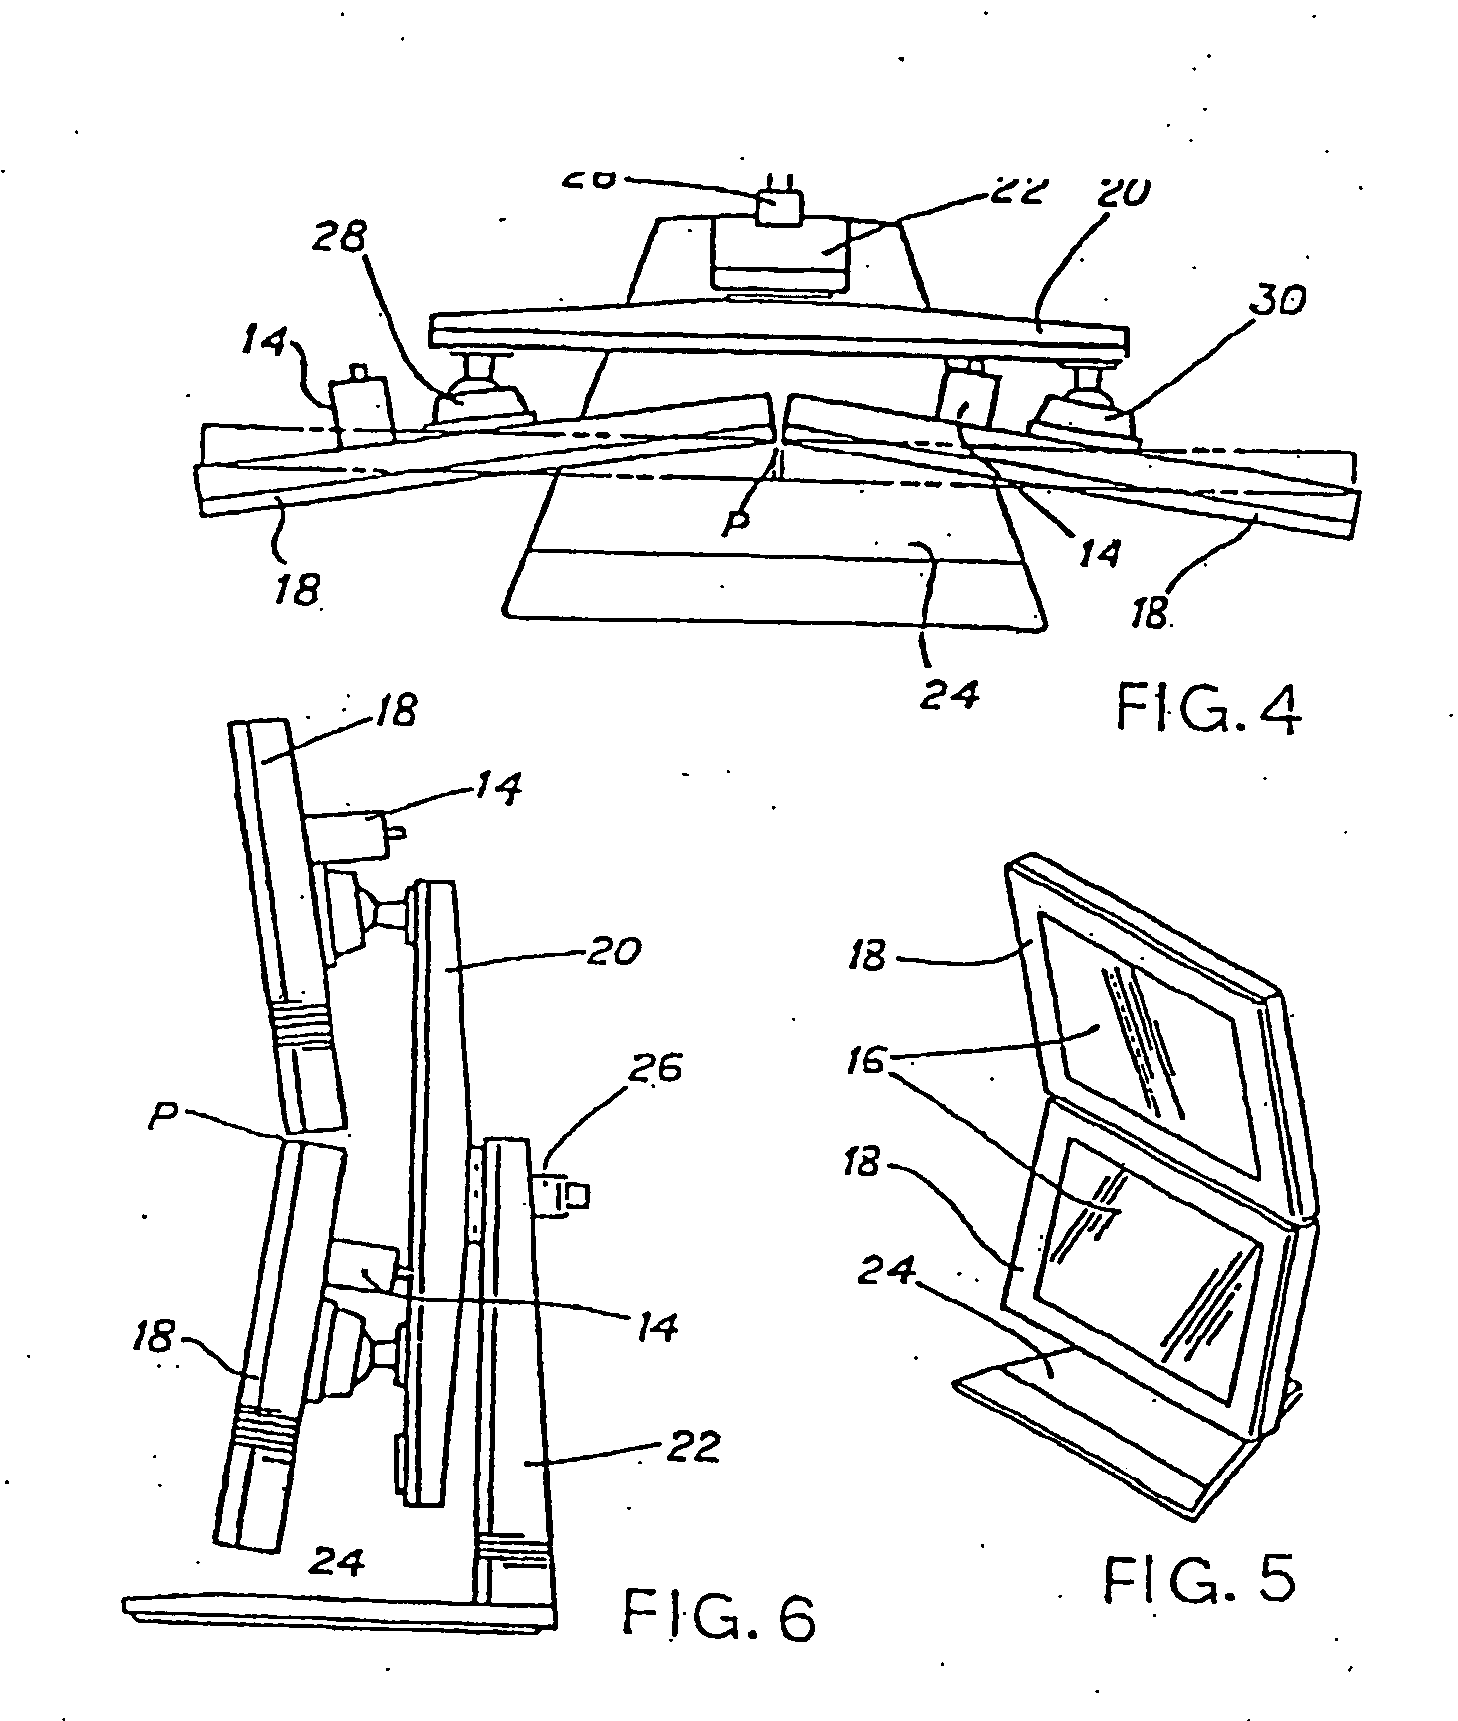 Computer display screen system and adjustable screen mount, and swinging screens therefor